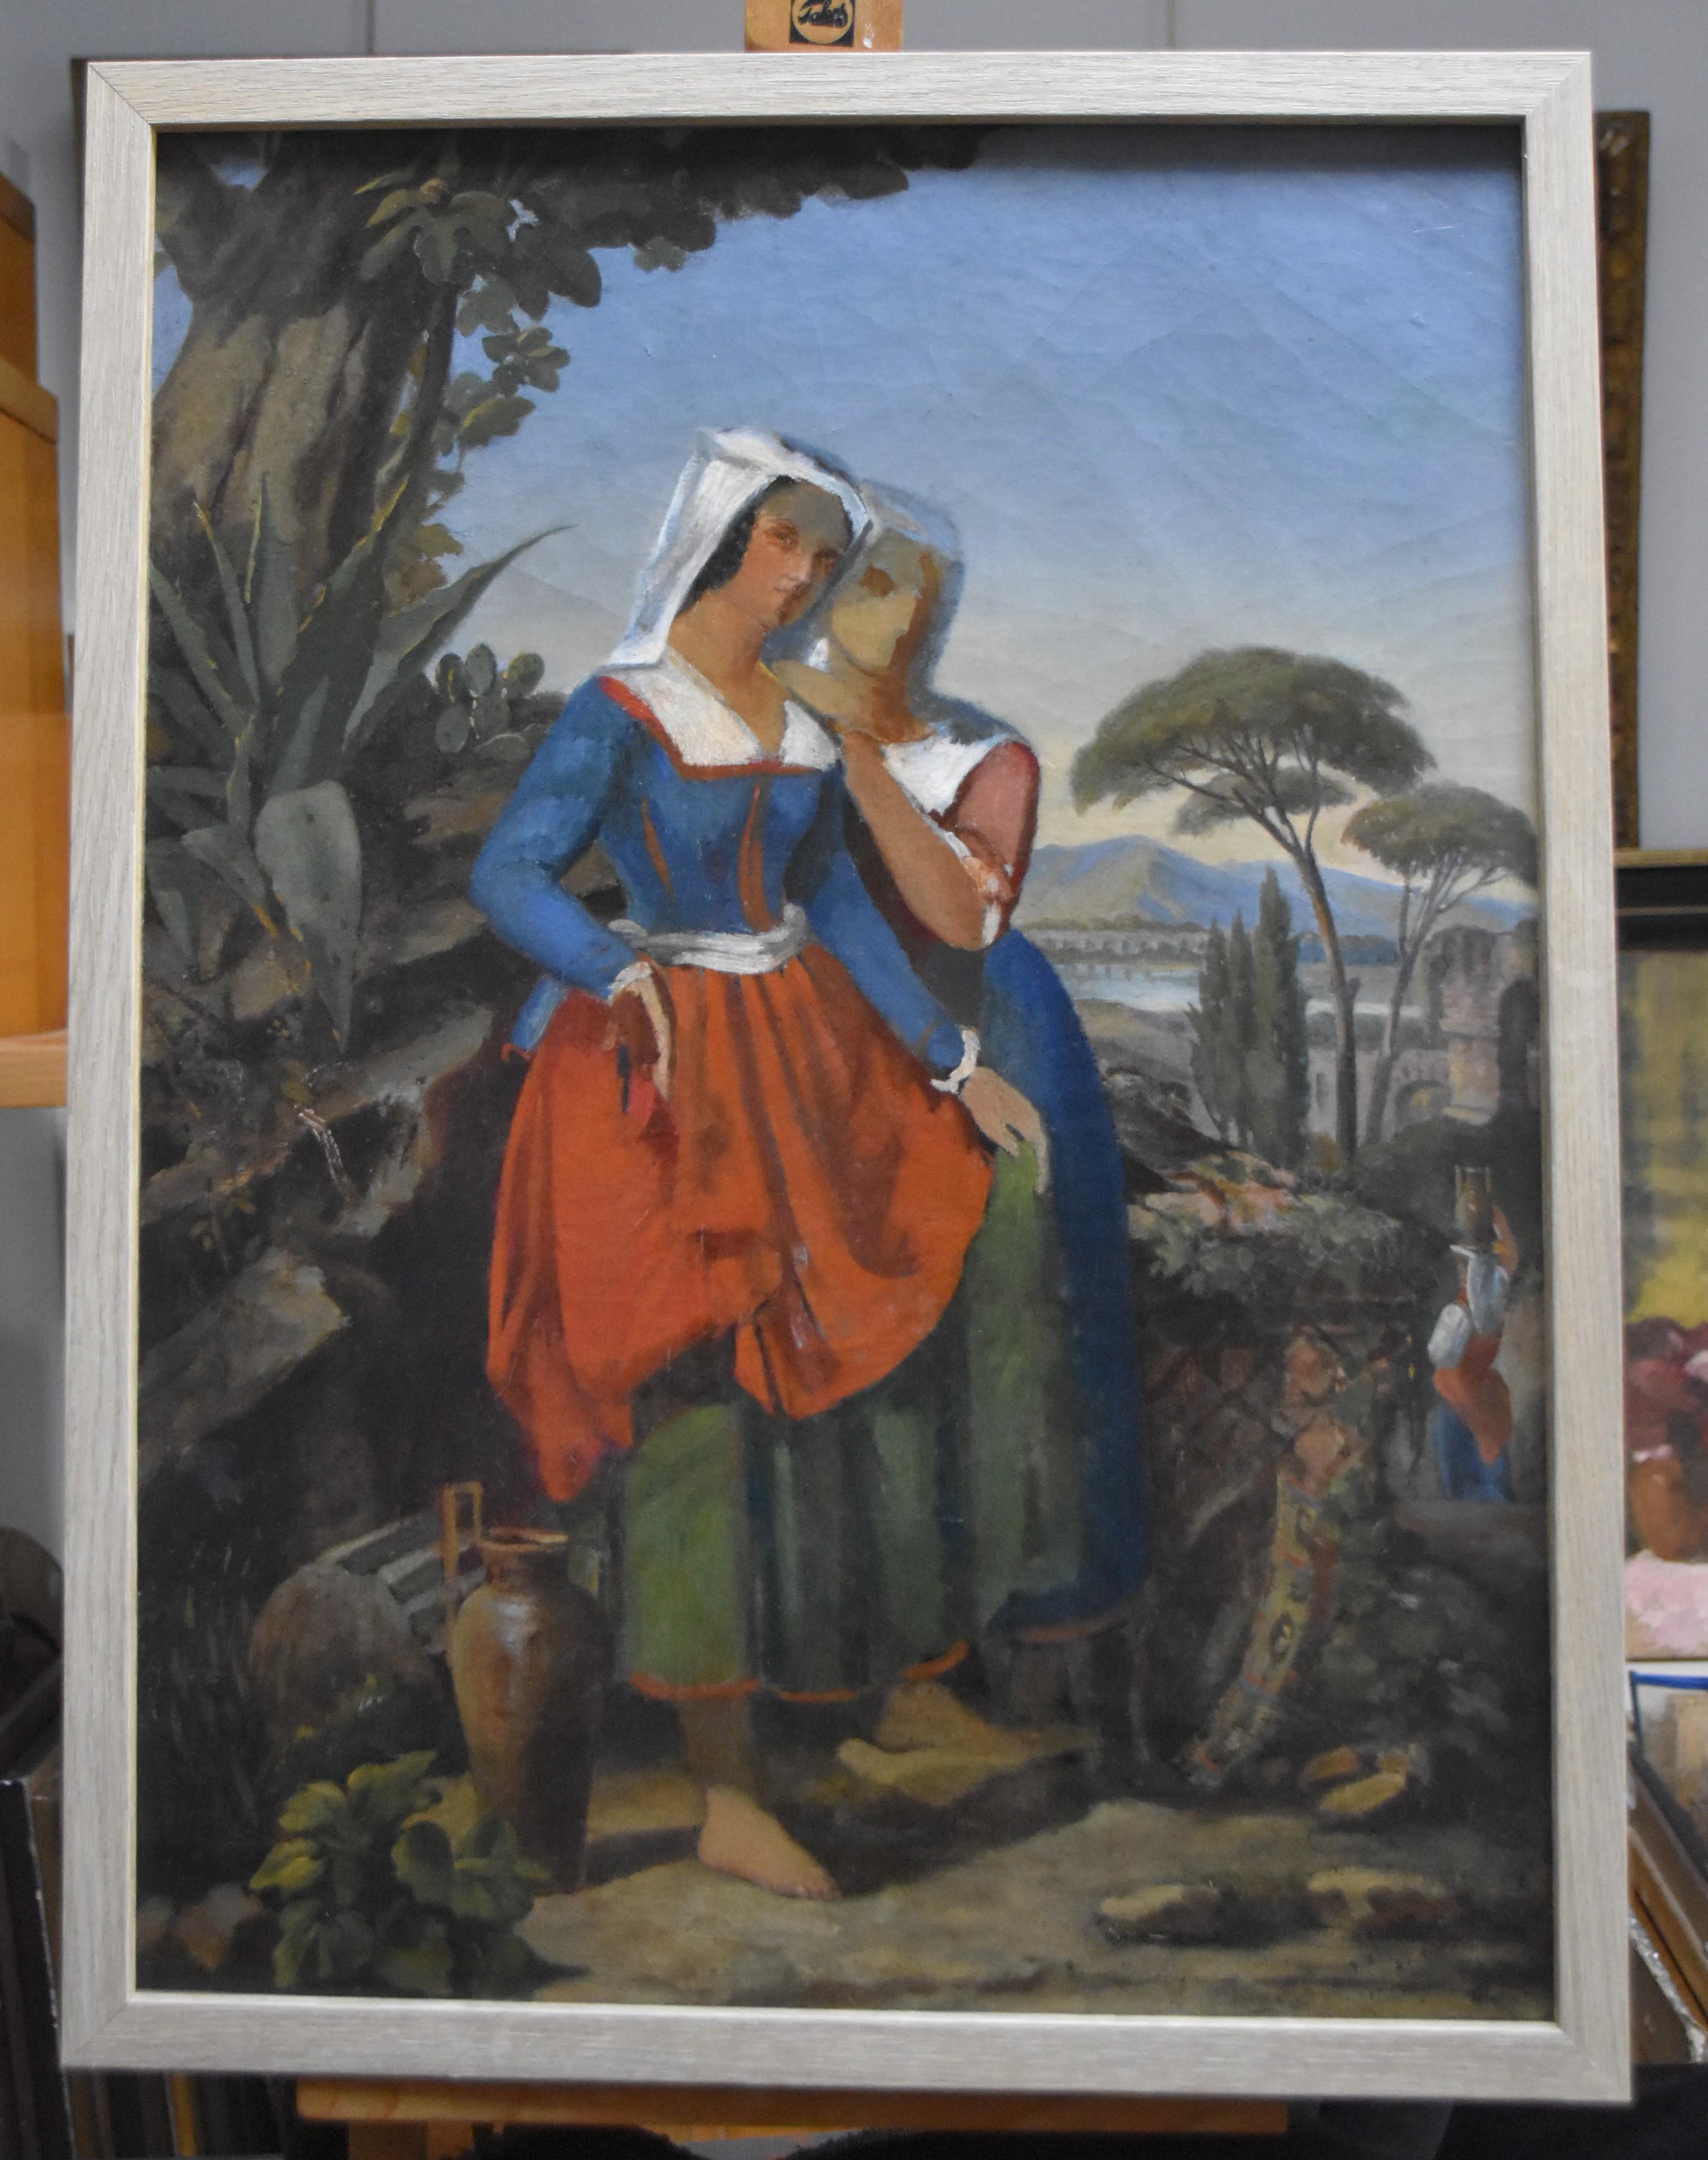 19th Century French school, 
Two italian women in a landscape, 
oil on canvas
59 x 43.5 cm
Bears a signature and a date on the lower left (see photograph please) but barely lisible  